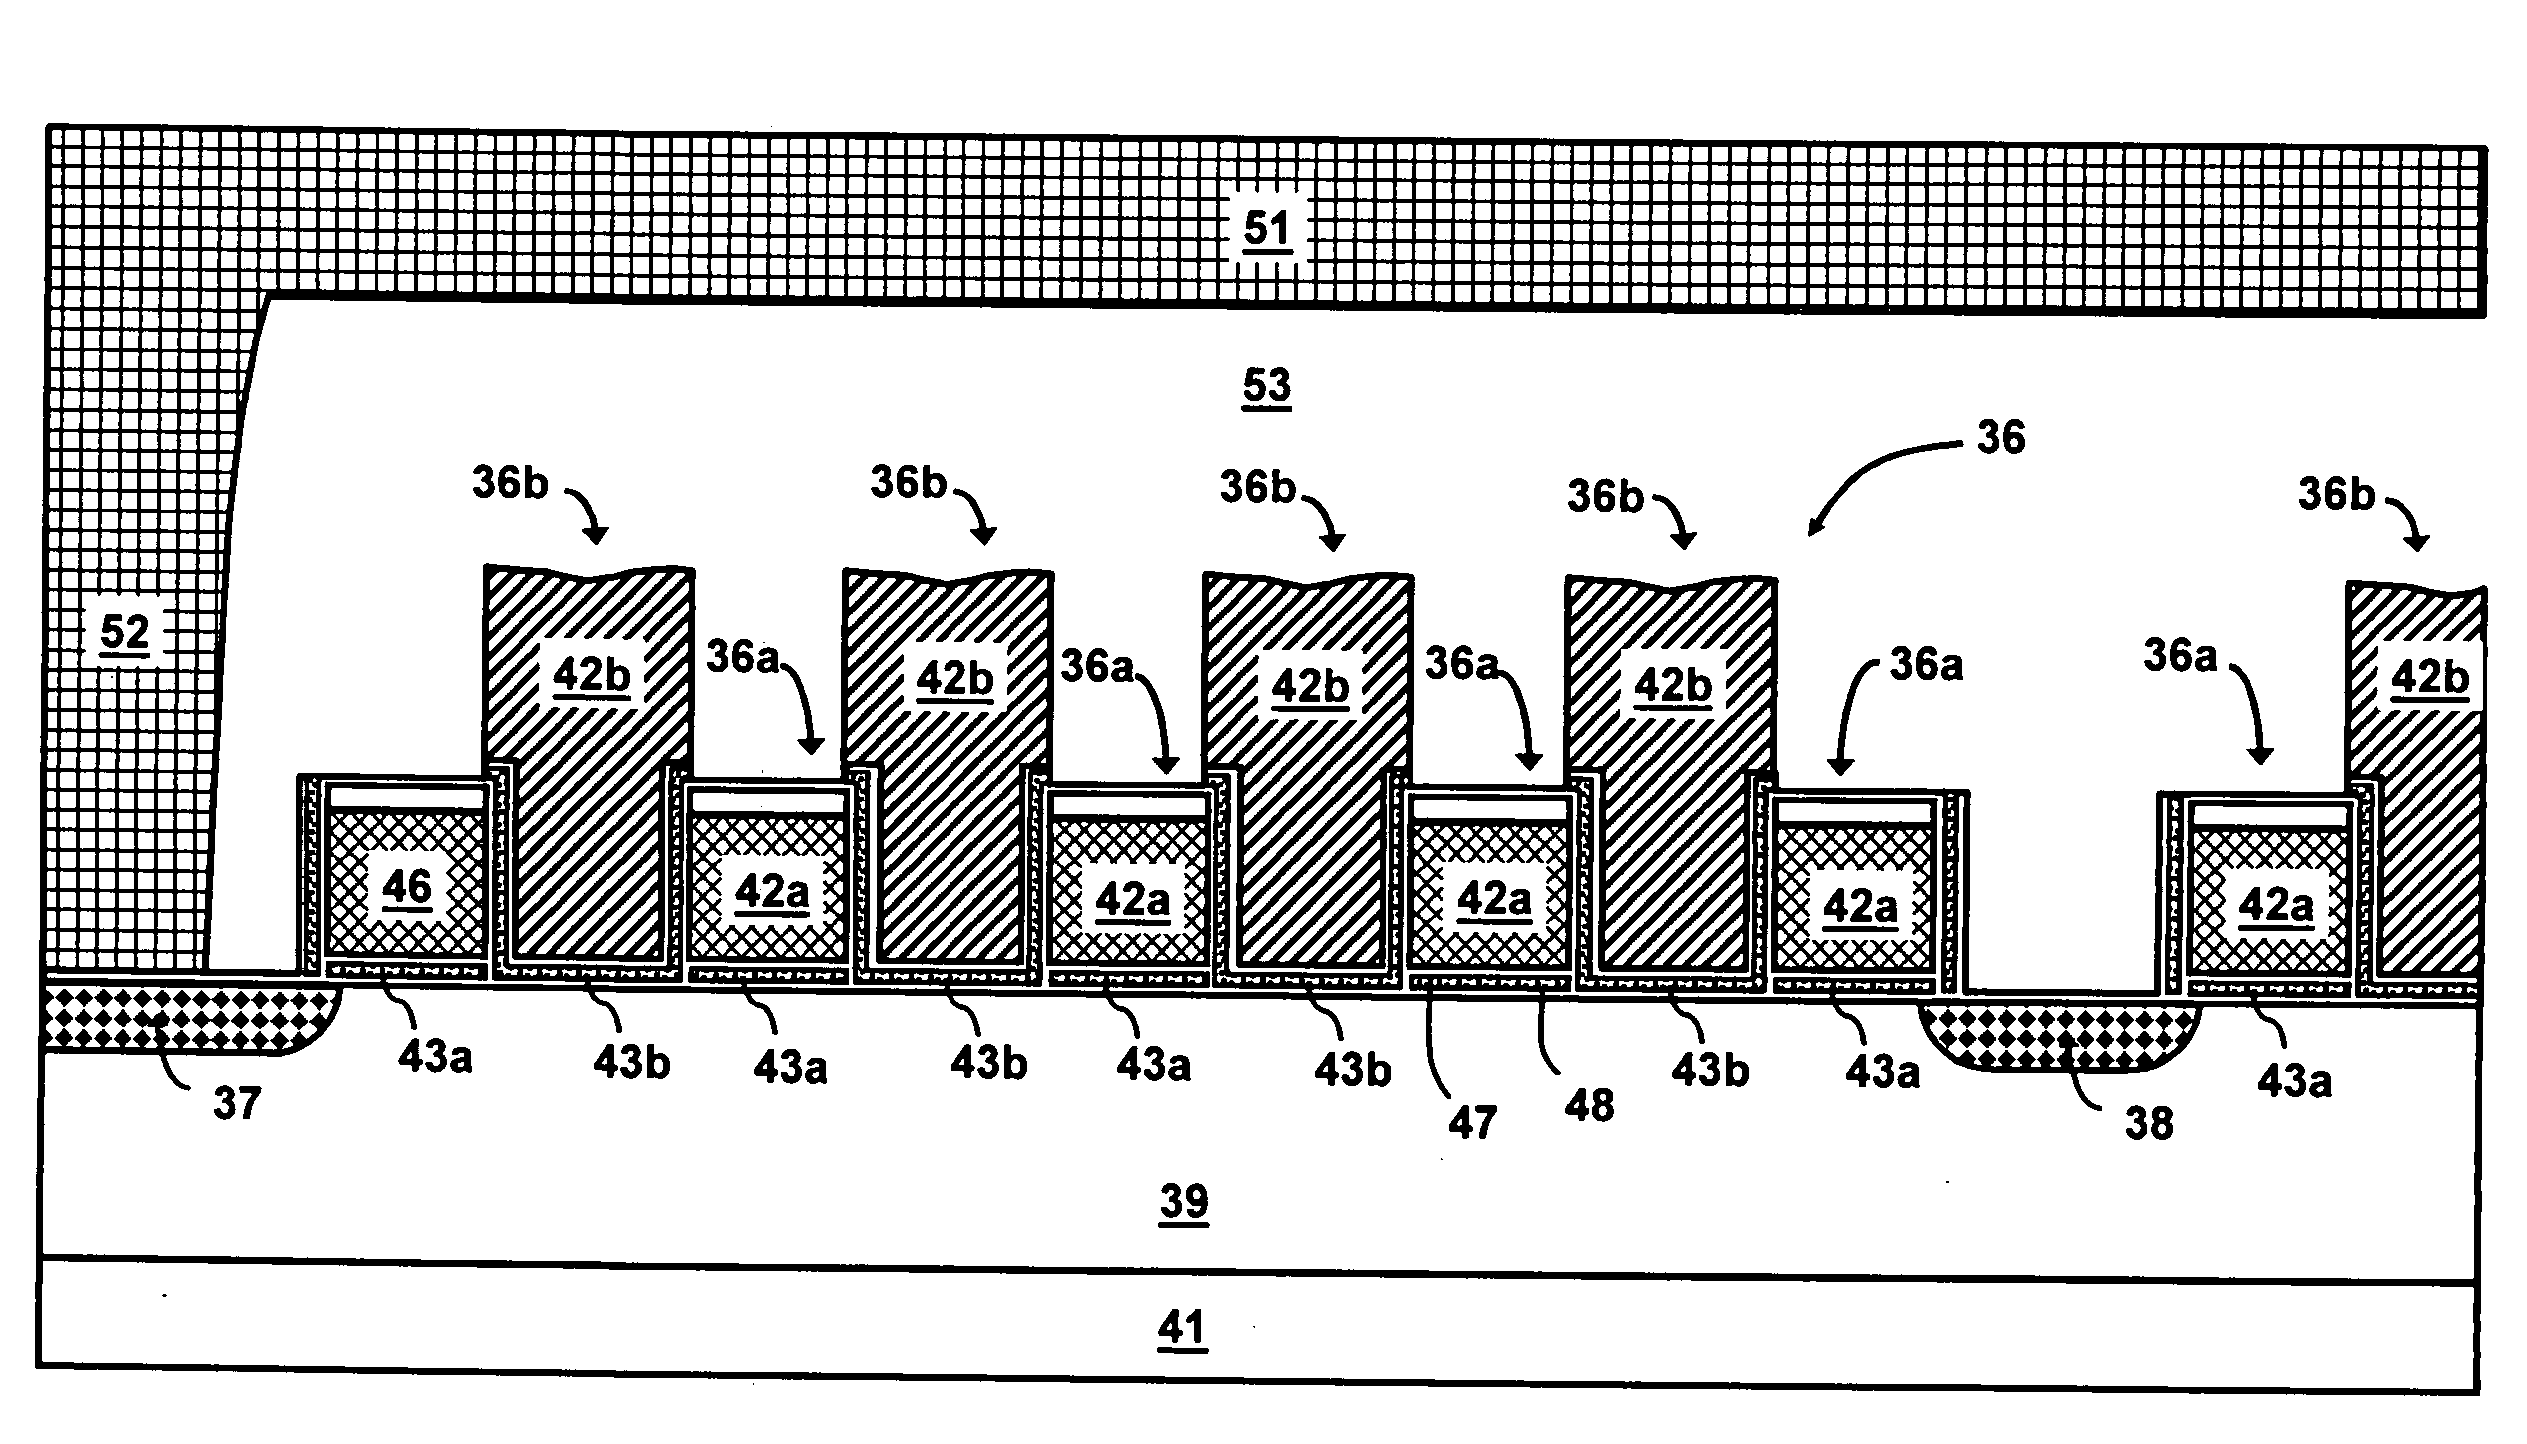 NAND flash memory with densely packed memory gates and fabrication process